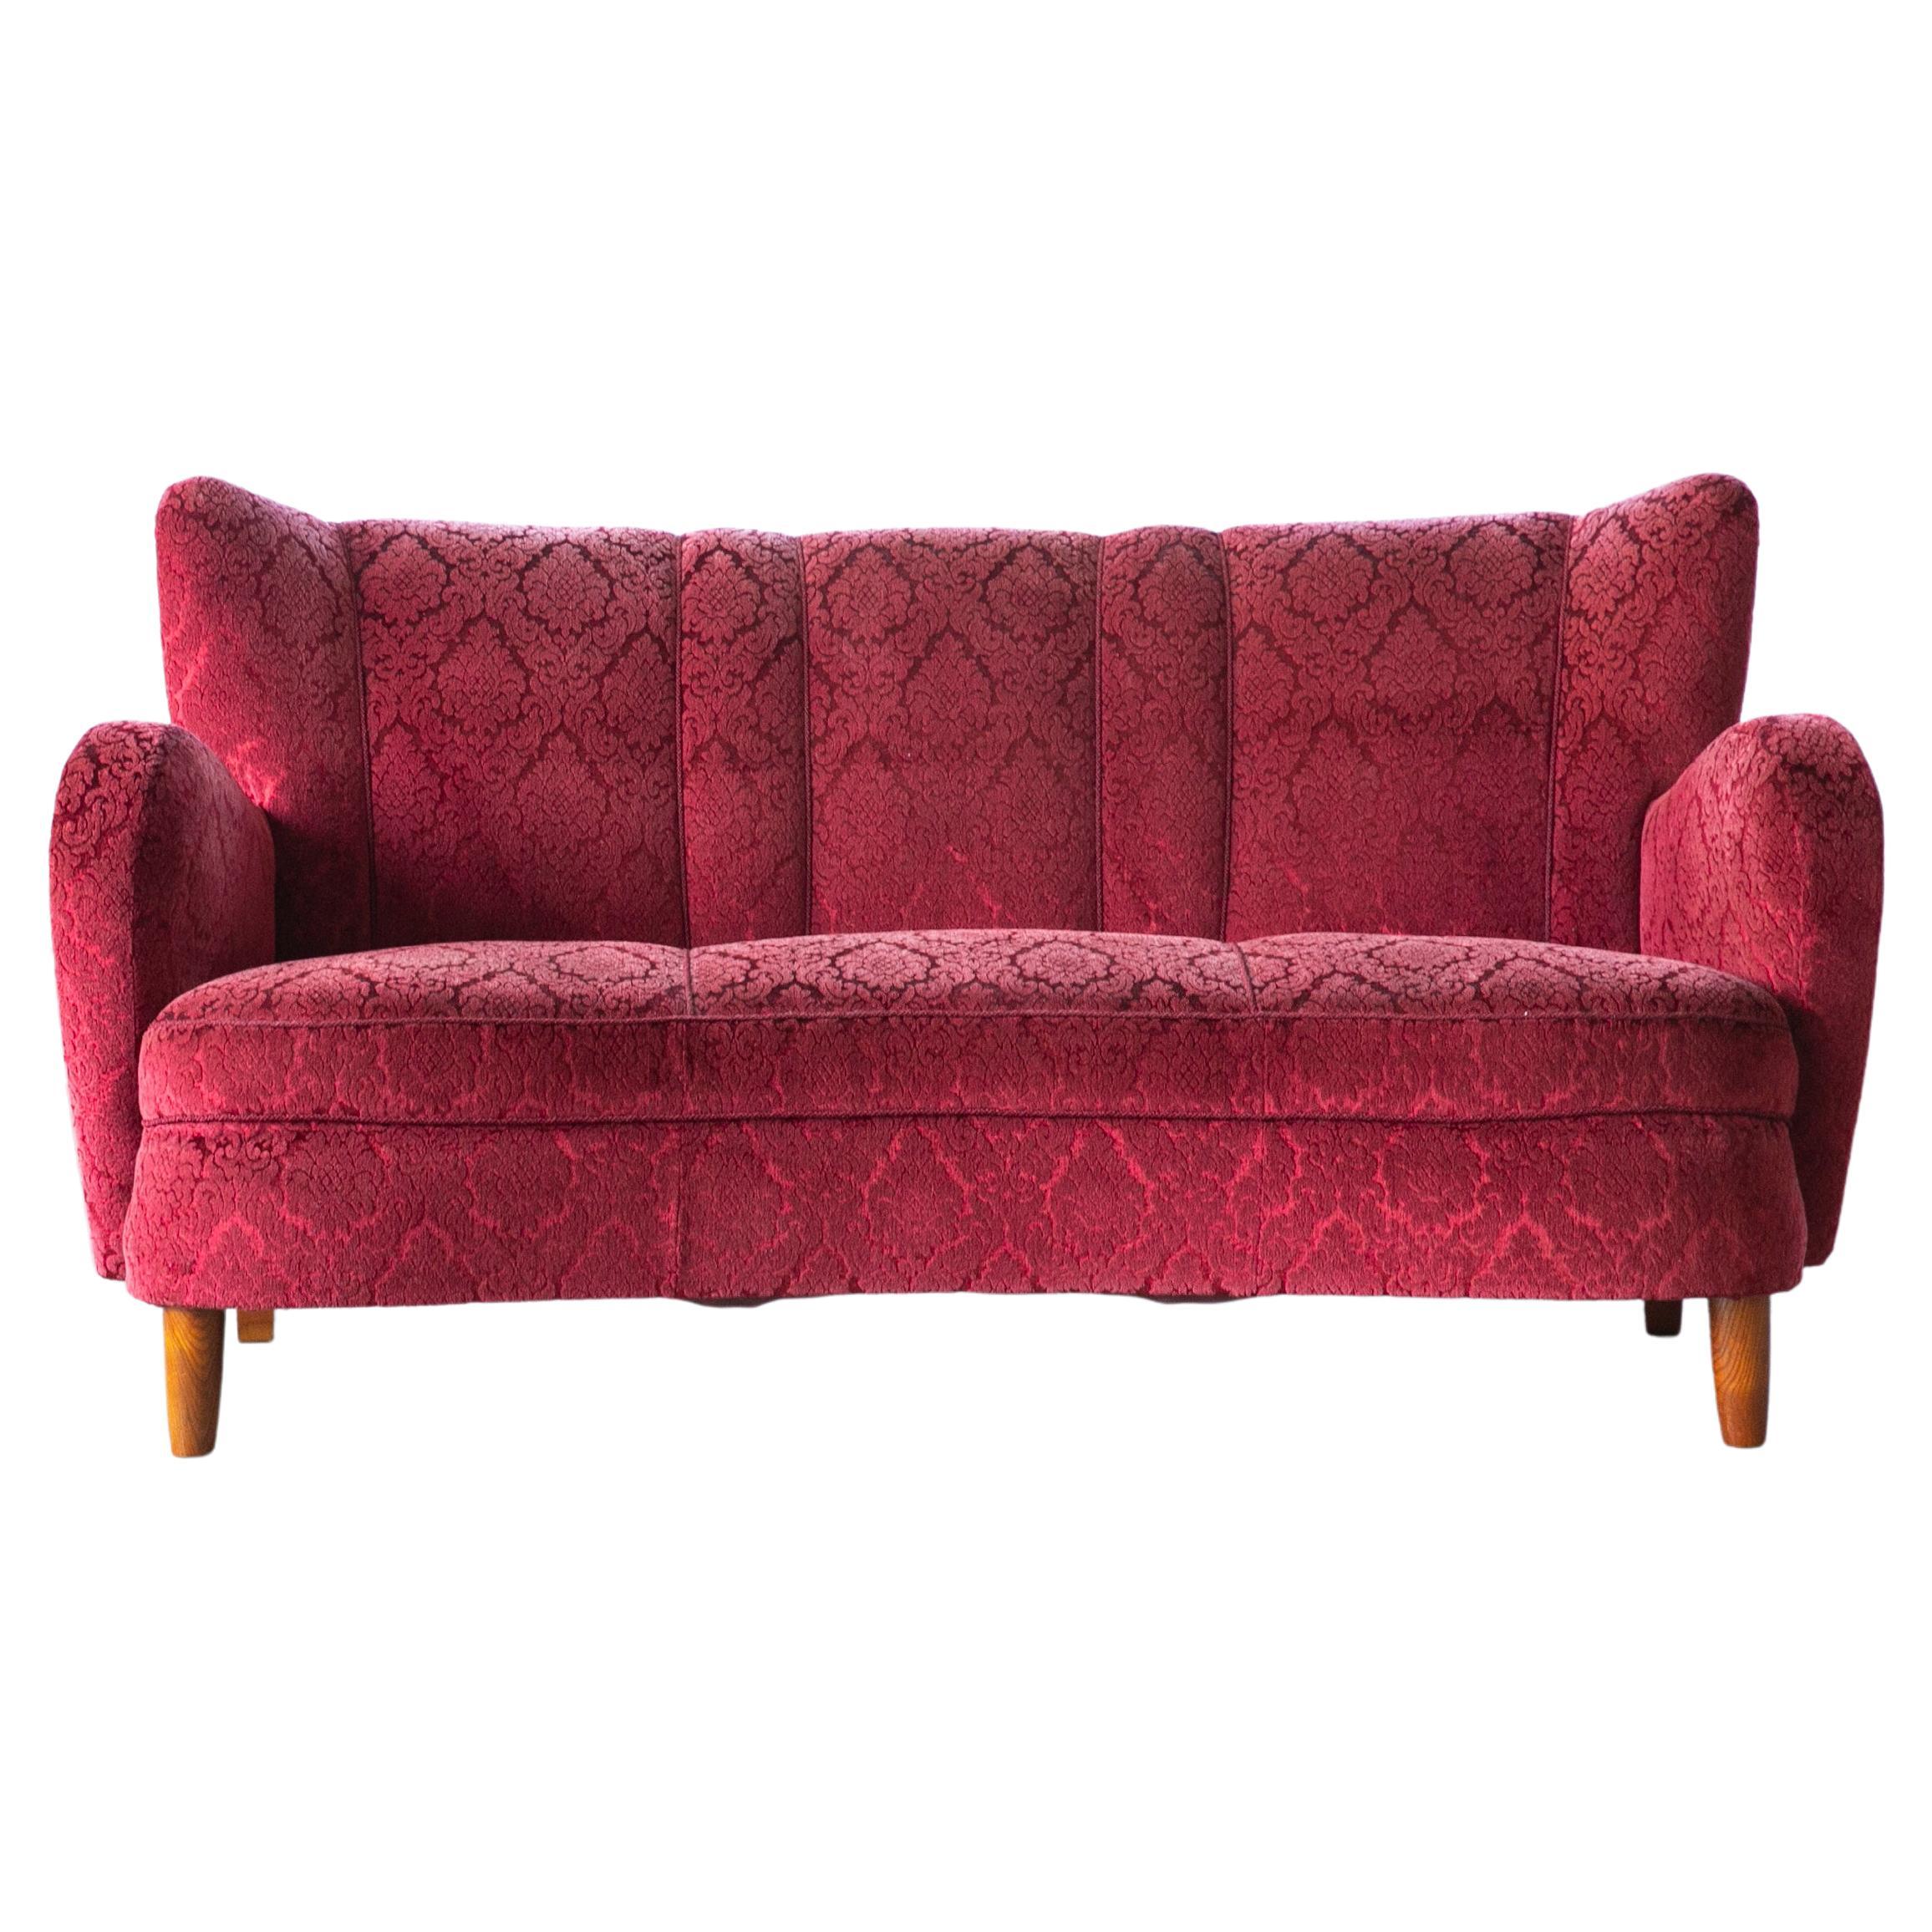 Danish 1940s Curved Sofa or Loveseat in Red Mohair